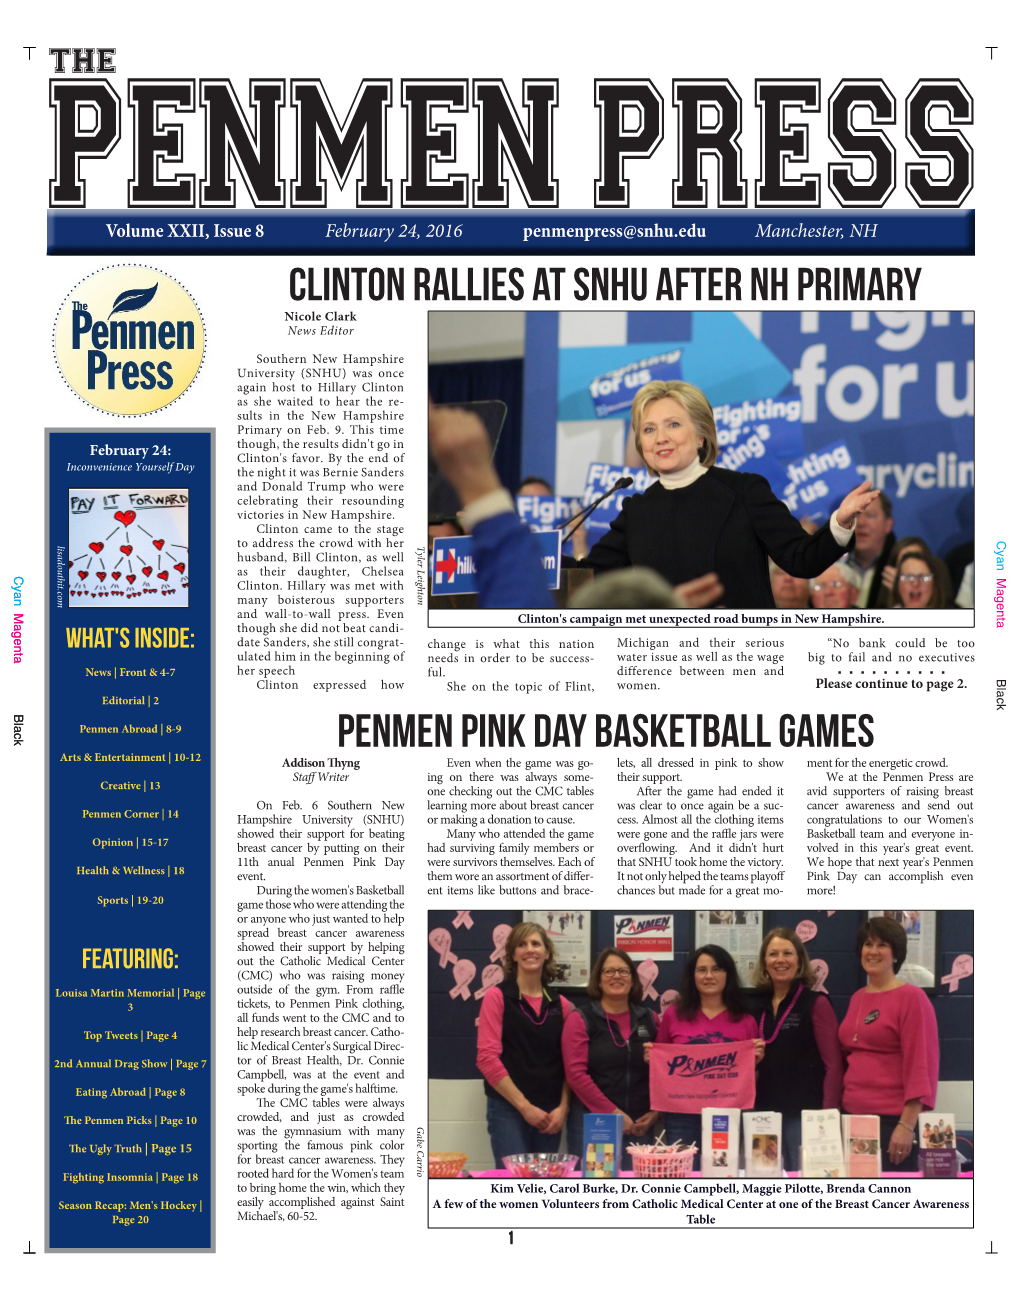 The Penmen Press Arepress Penmen the at We Please Continue to Page 2